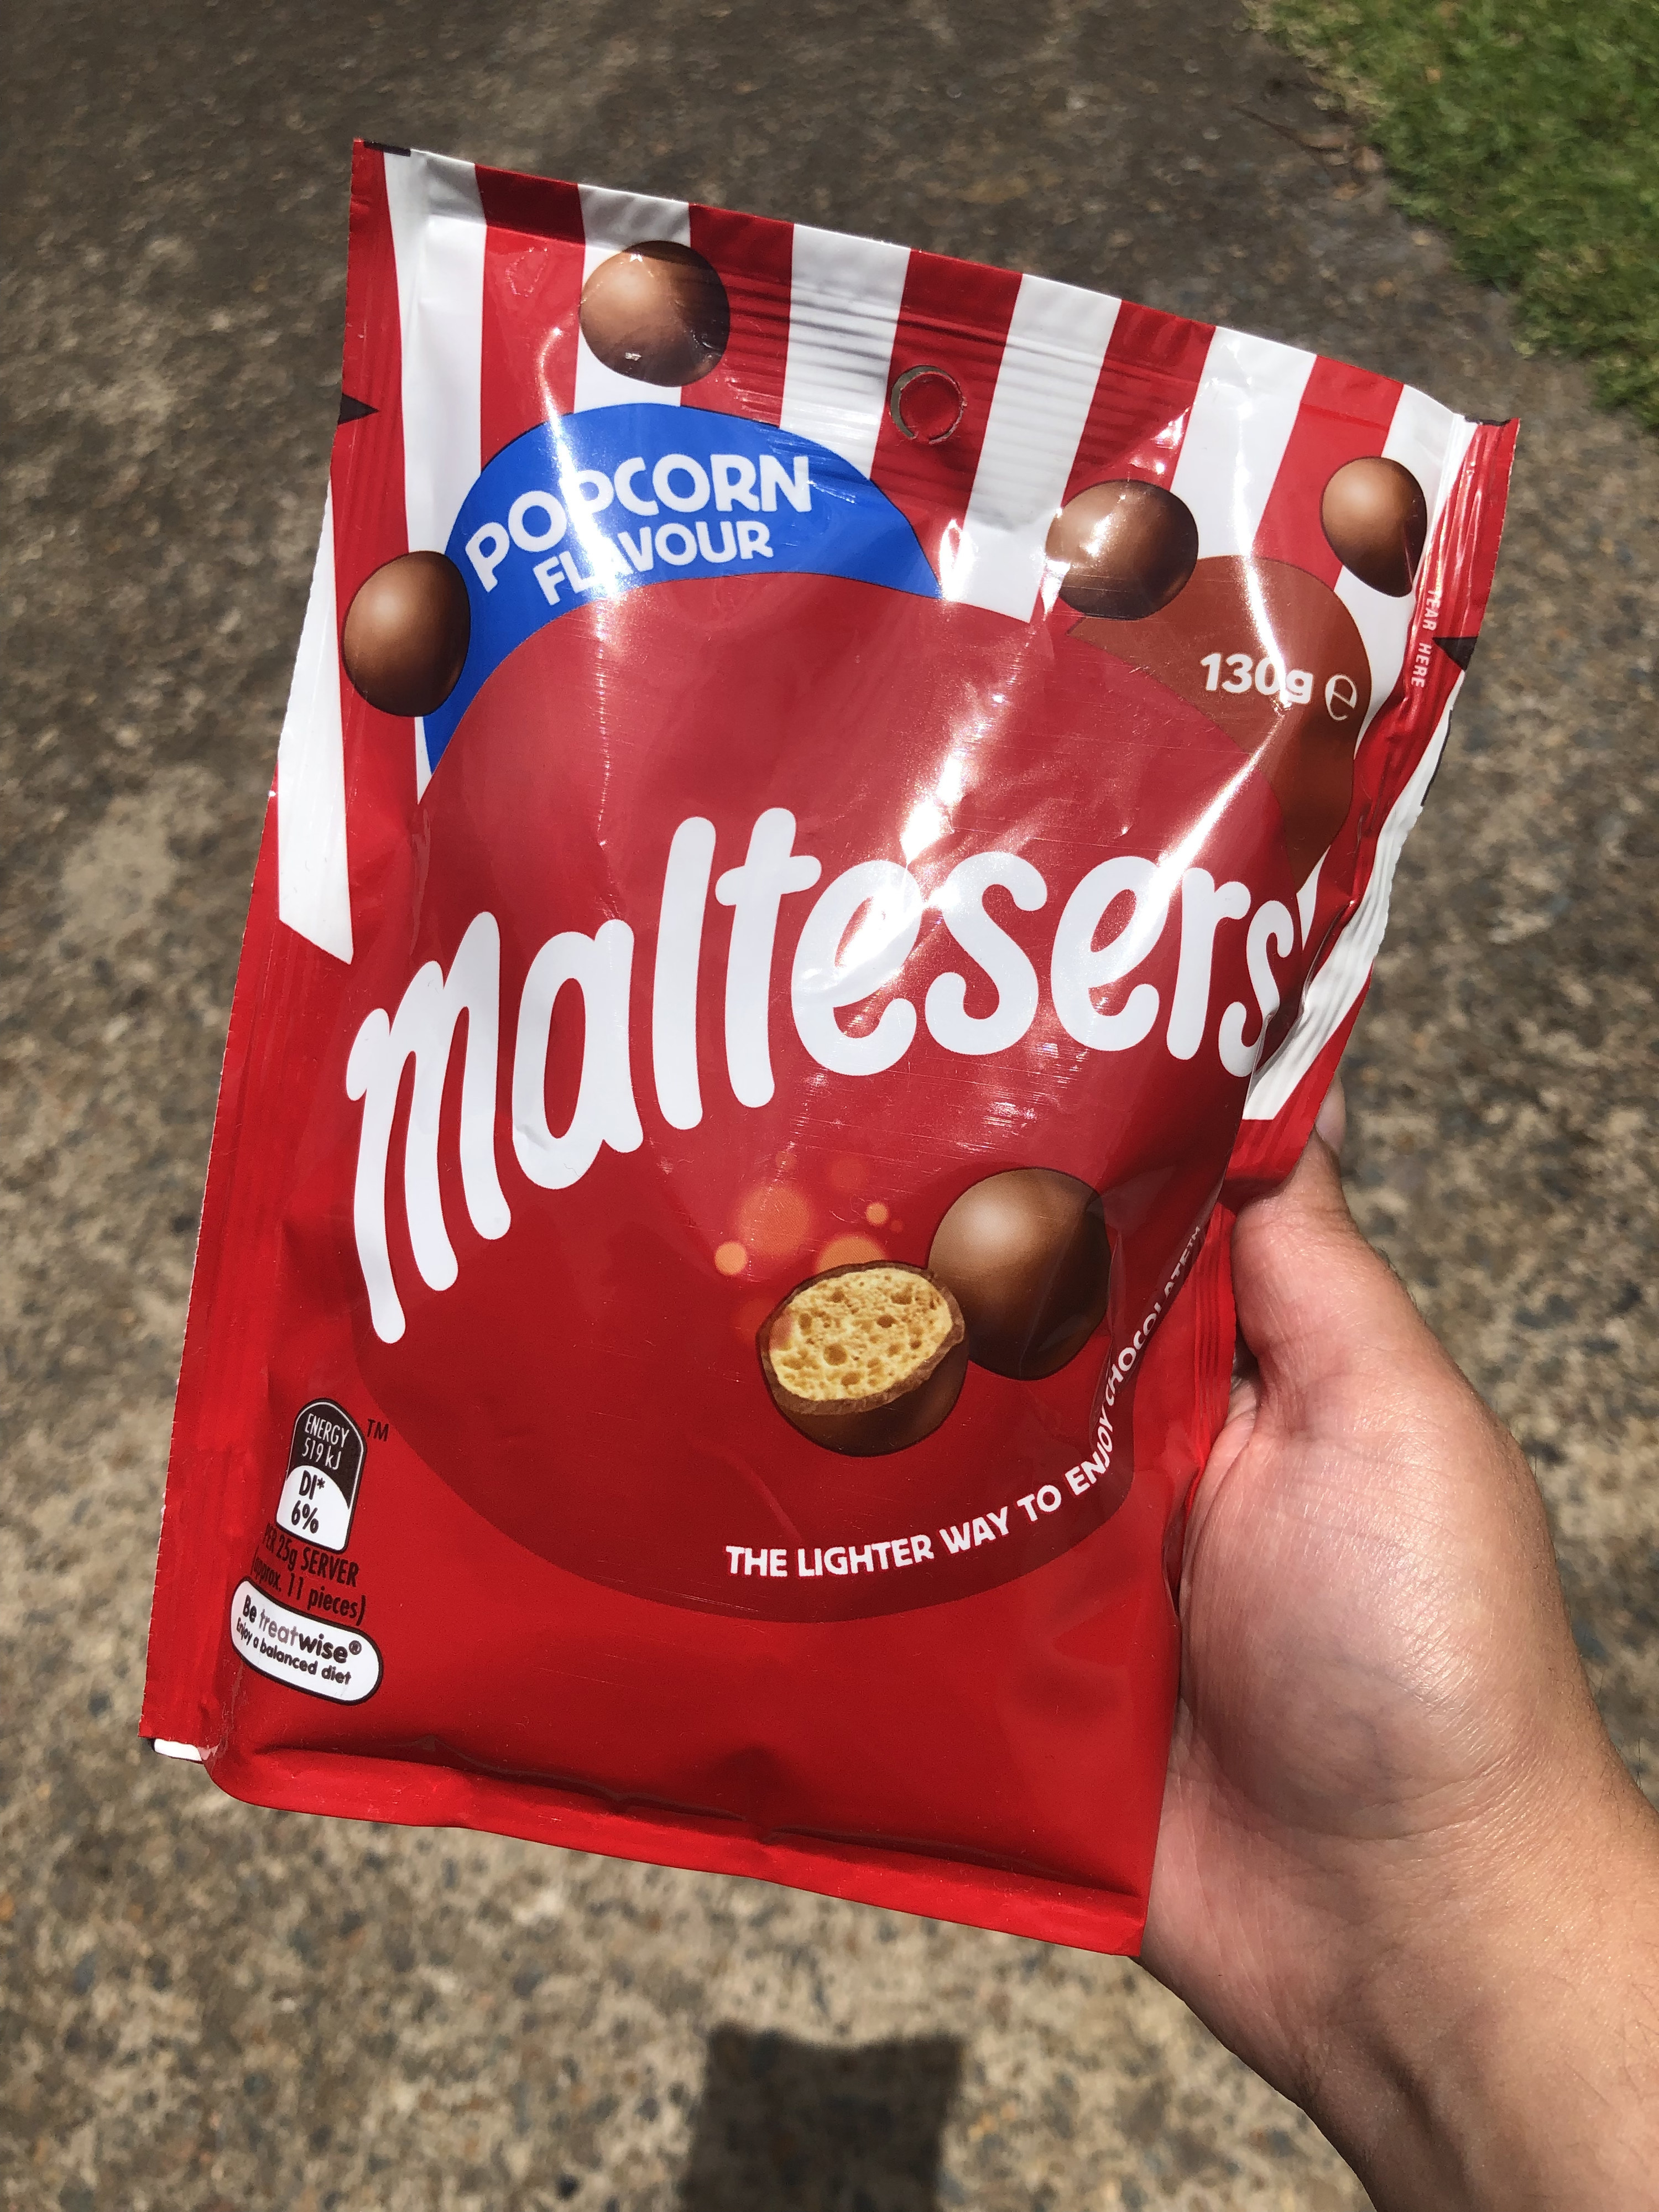 A hand holding a bag of popcorn flavour Maltesers